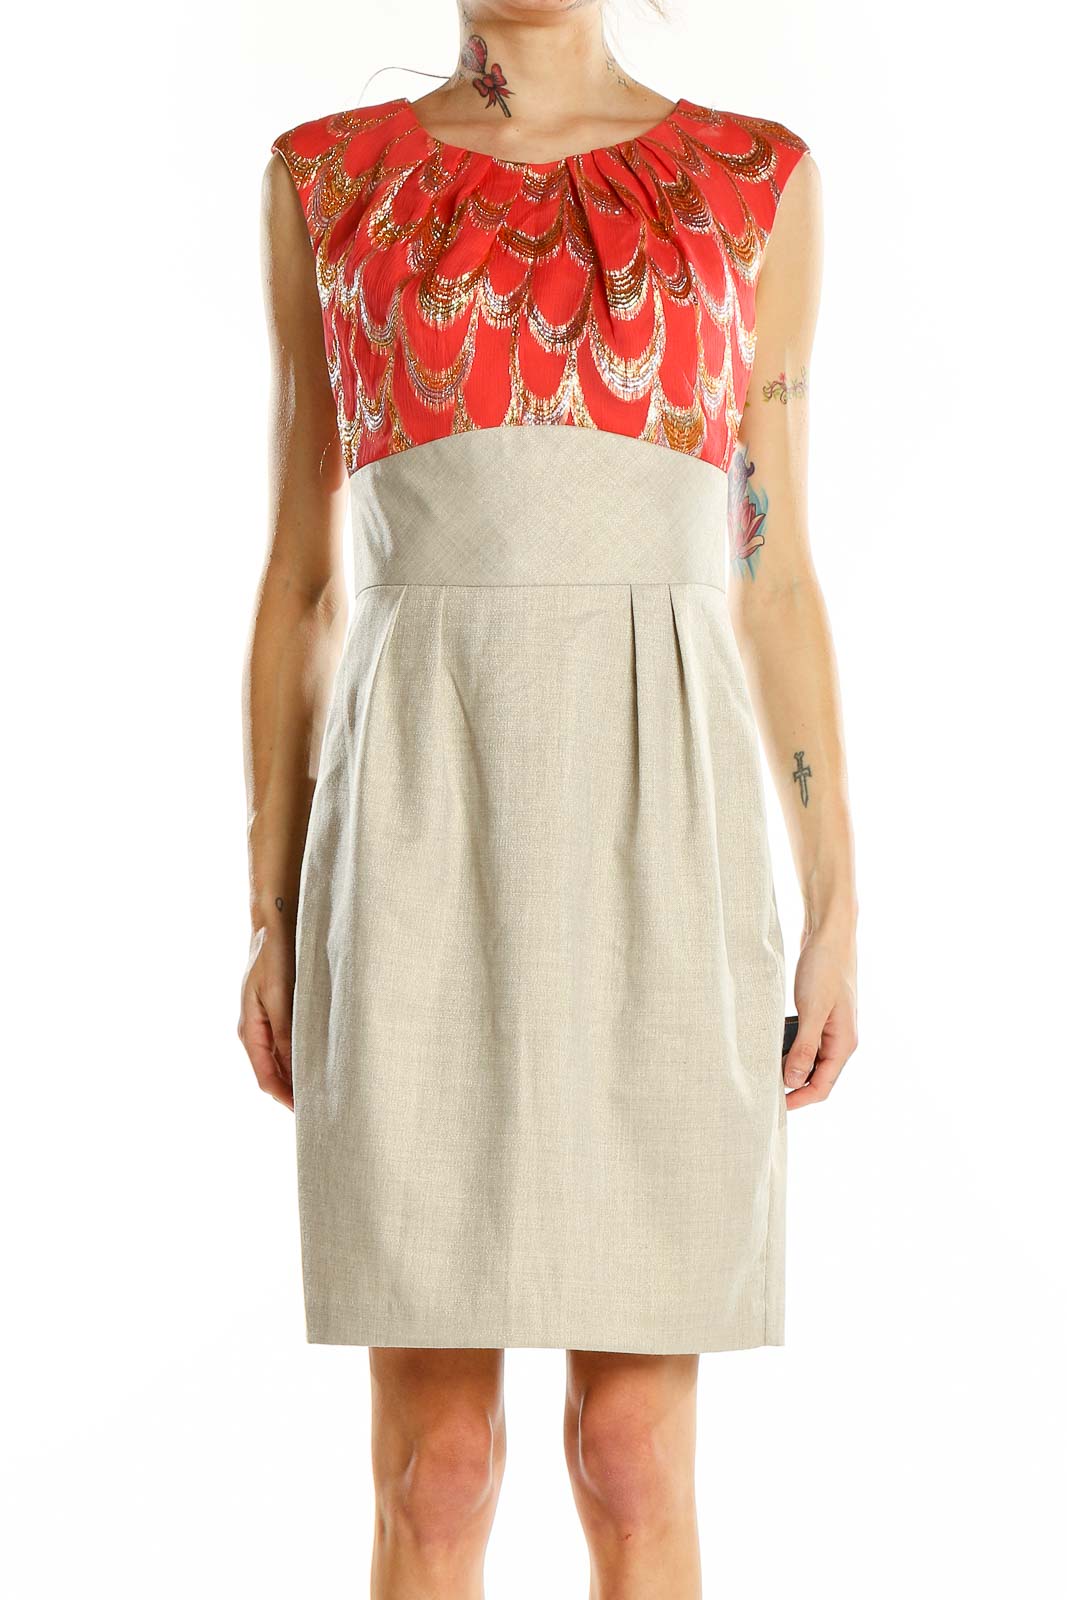 Red Beige Mixed Media Sleeveless Dress Front